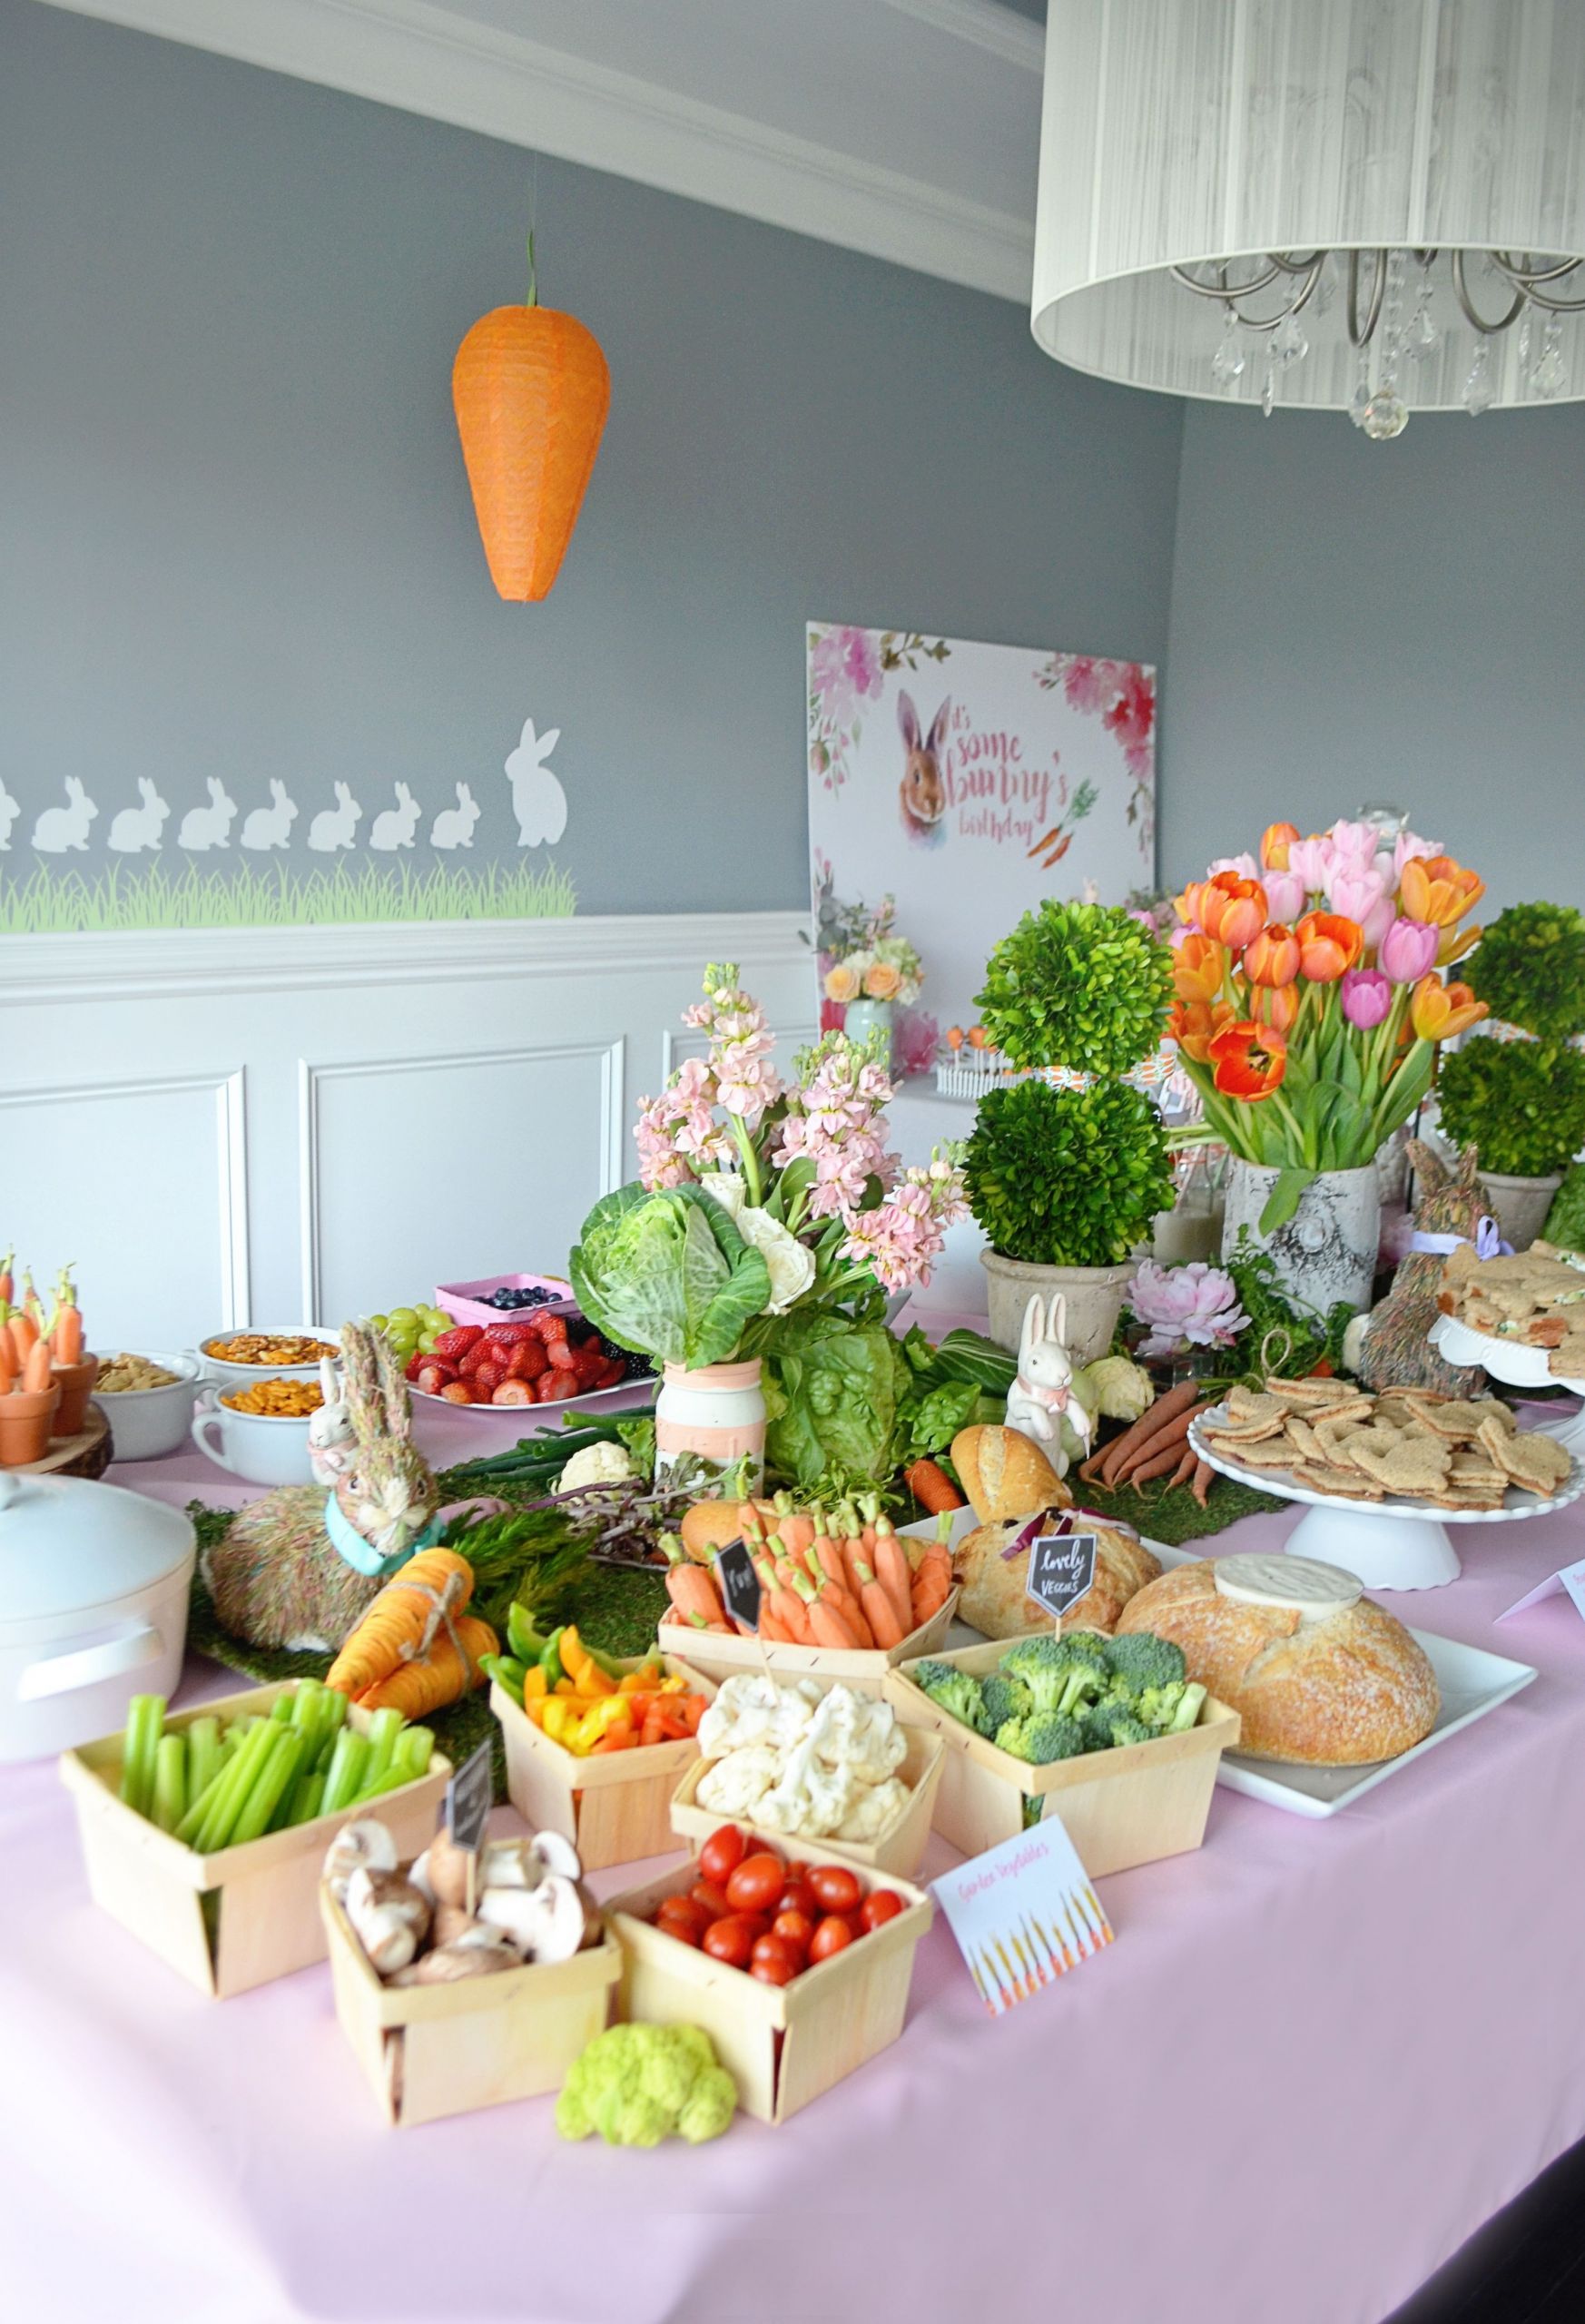 Easter Themed Party Ideas For Adults
 Shop the Party Bunny Themed Party